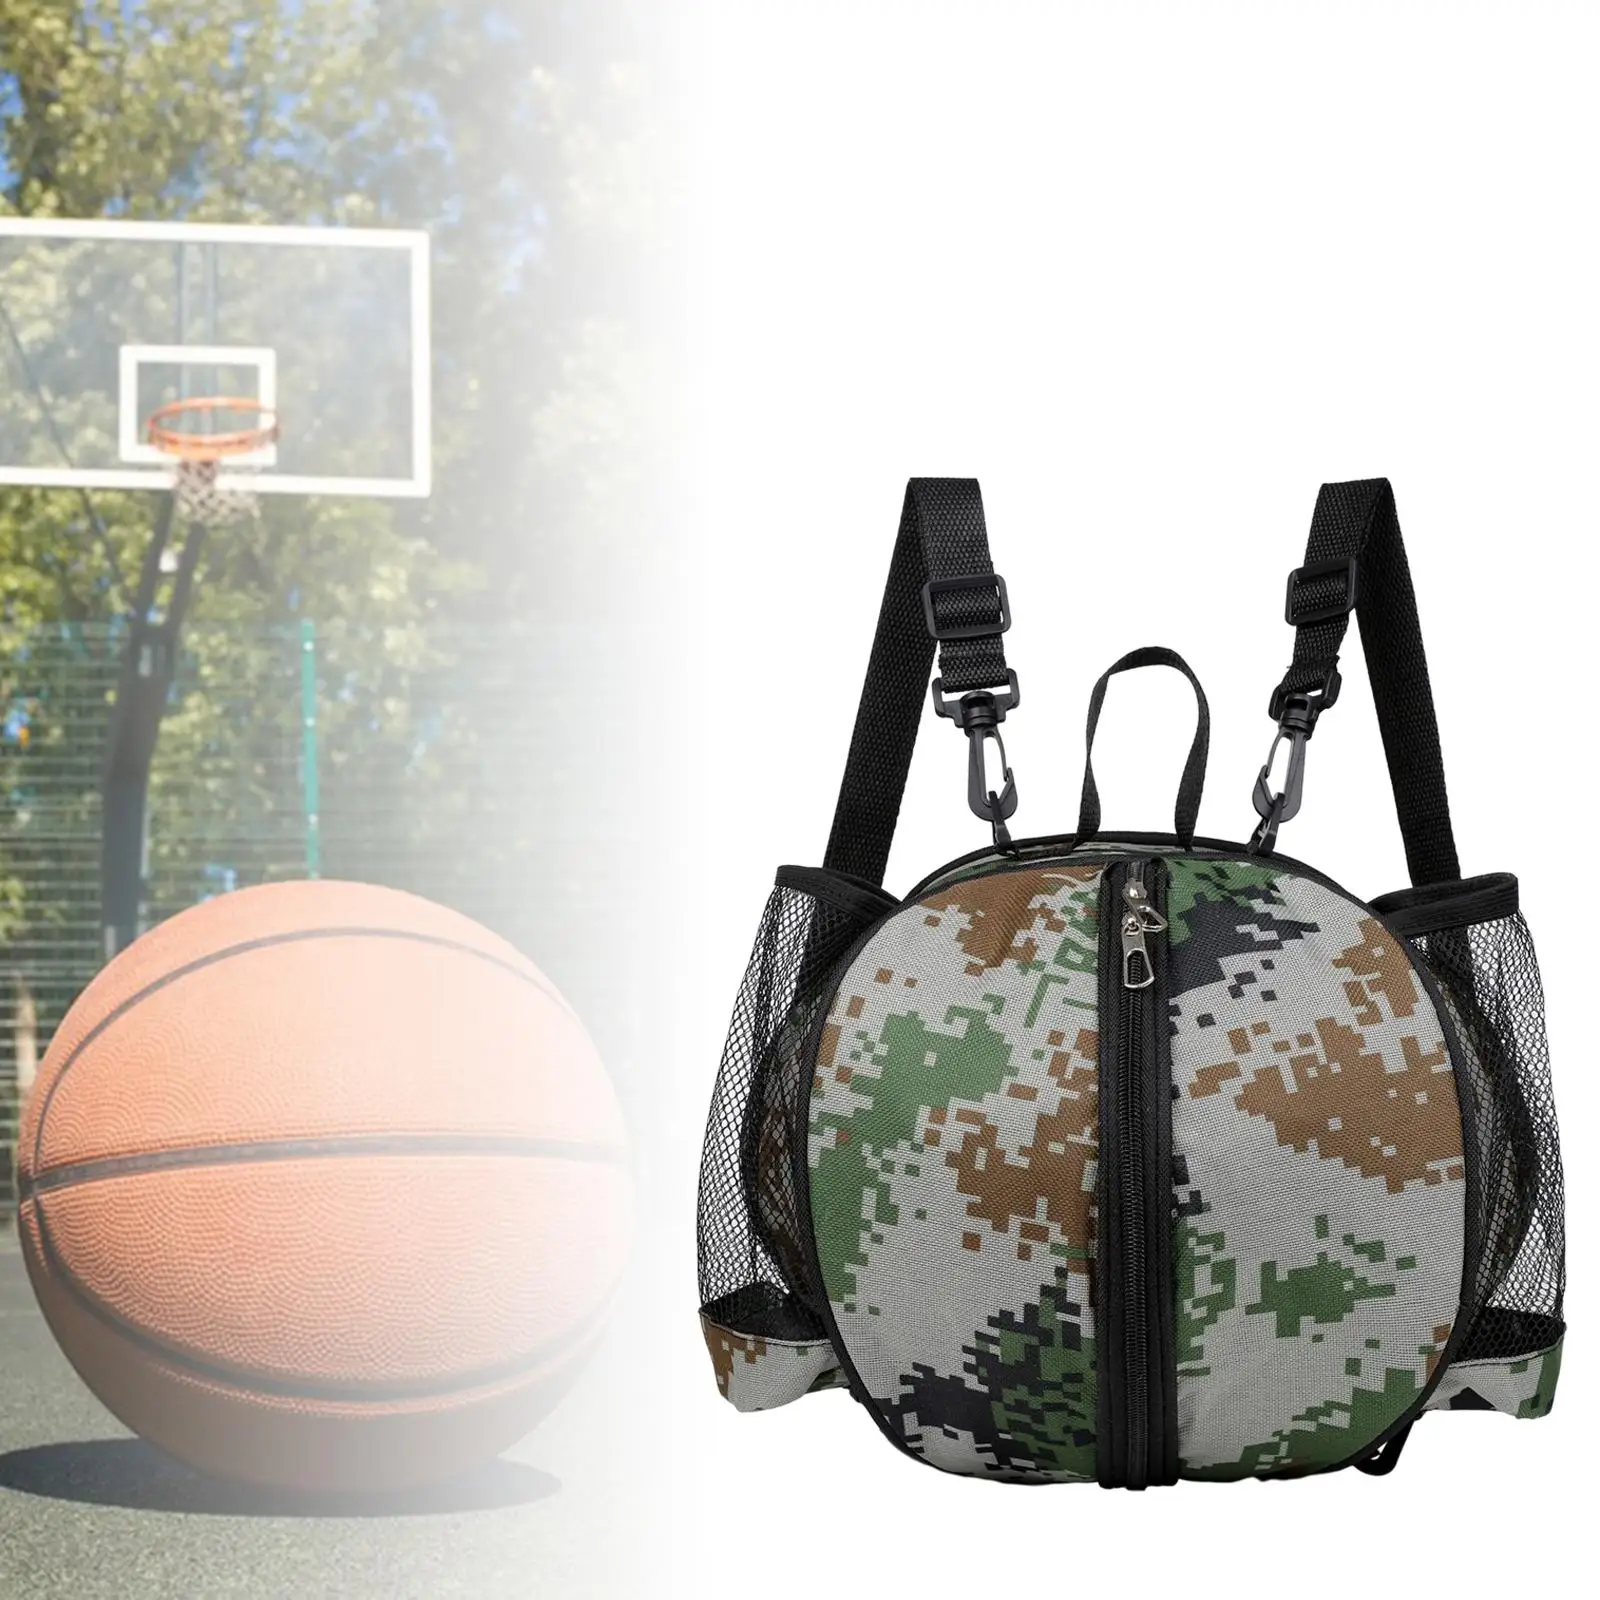 Basketball Shoulder Bag Backpack Sports Ball Bag Tear Resistant for Boys Girls with Two Sides Mesh Pockets Waterproof Durable